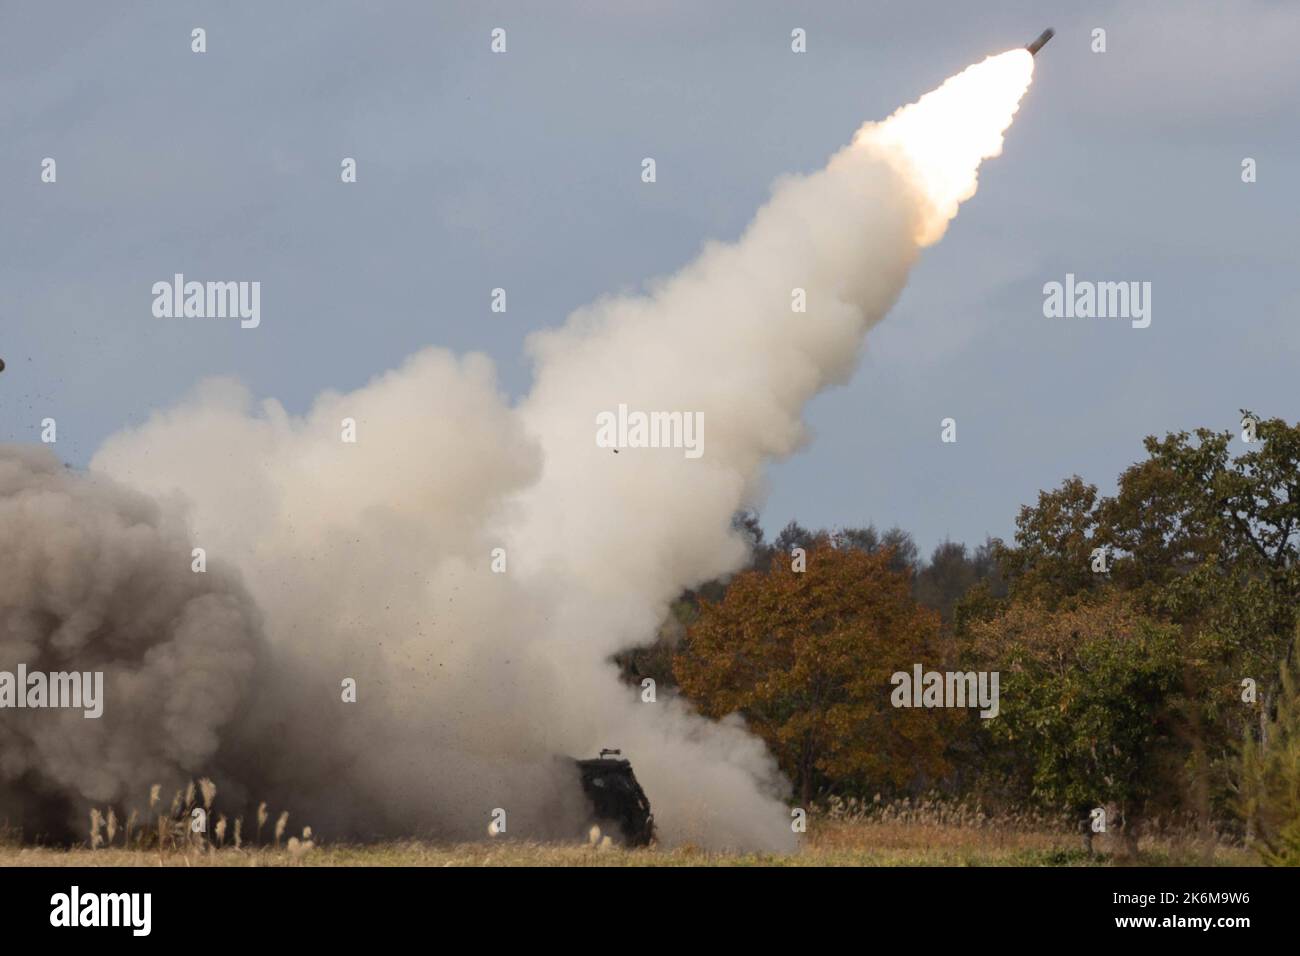 U.S. Marines with 3d Battalion, 12th Marines, 3d Marine Division, fire rockets from an M142 High Mobility Artillery Rocket System during exercise Resolute Dragon 22 at Yausubetsu Maneuver Area, Hokkaido, Japan, Oct. 14, 2022. Resolute Dragon 22 is an annual bilateral exercise designed to strengthen the defensive capabilities of the U.S.-Japan Alliance by exercising integrated command and control, targeting, combined arms, and maneuver across multiple domains. (U.S. Marine Corps photo by Cpl. Lorenzo Ducato) Stock Photo